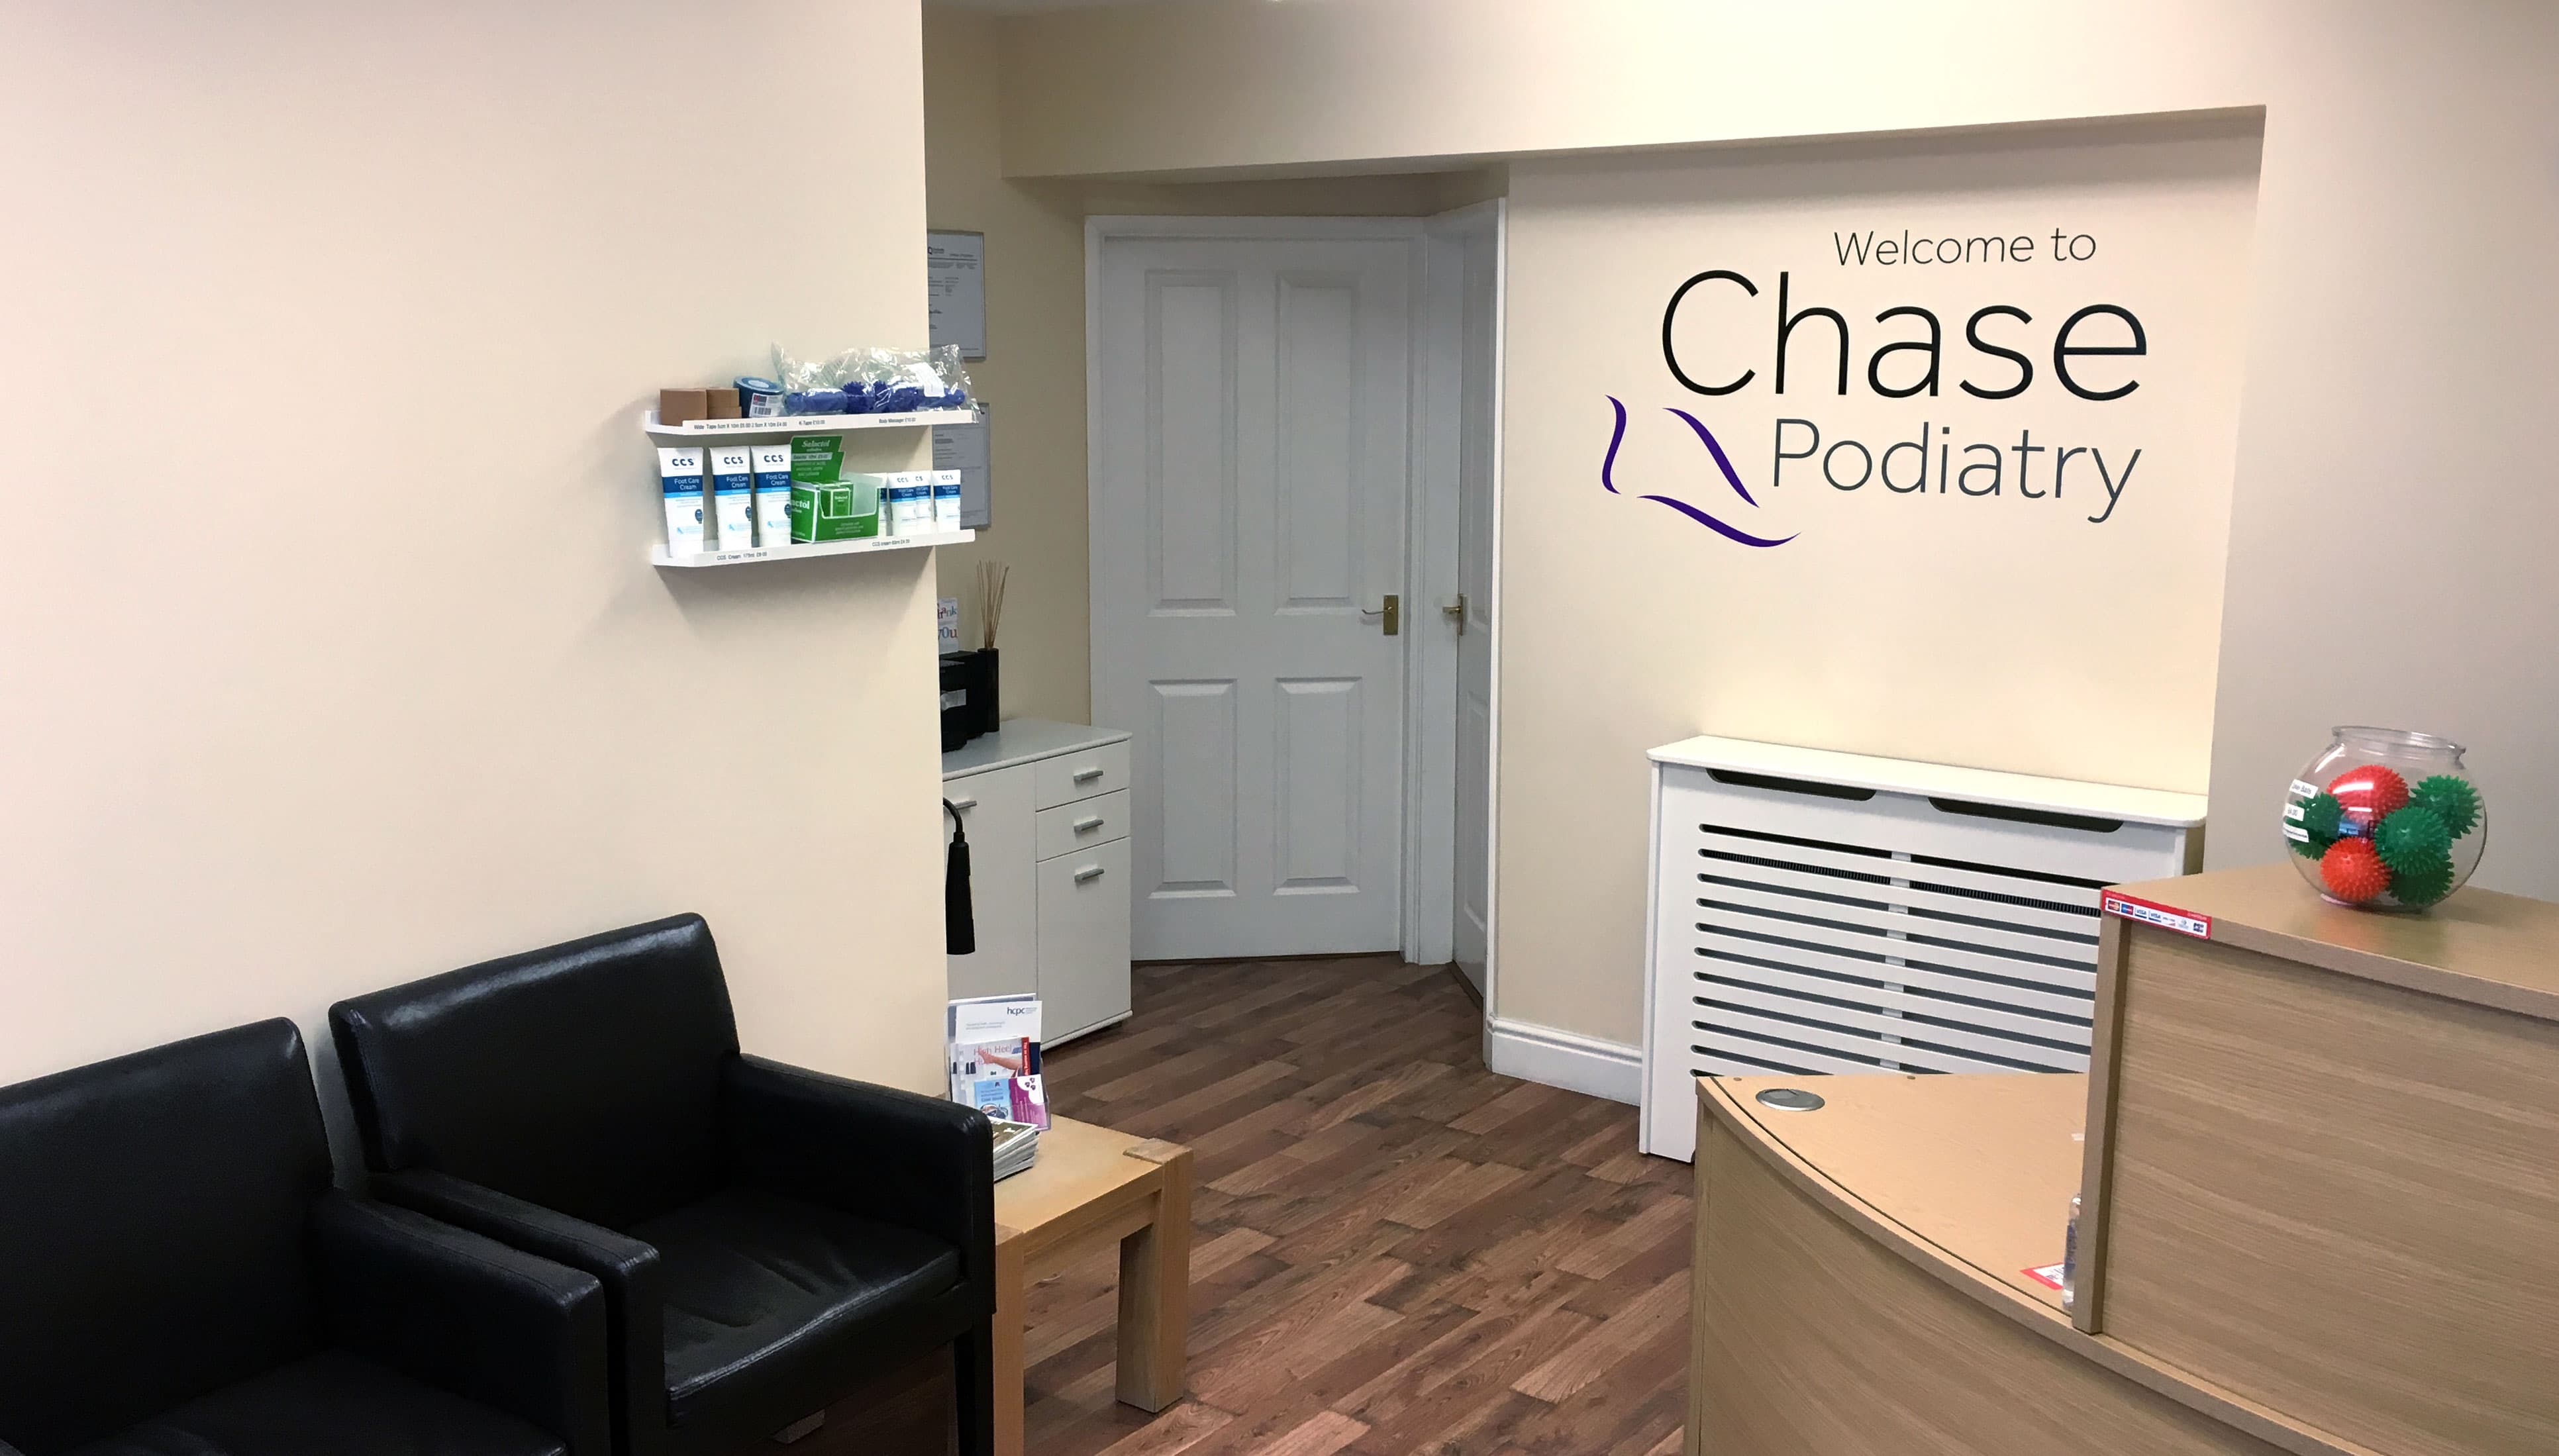 Chase Podiatry & Chiropody Waiting Room